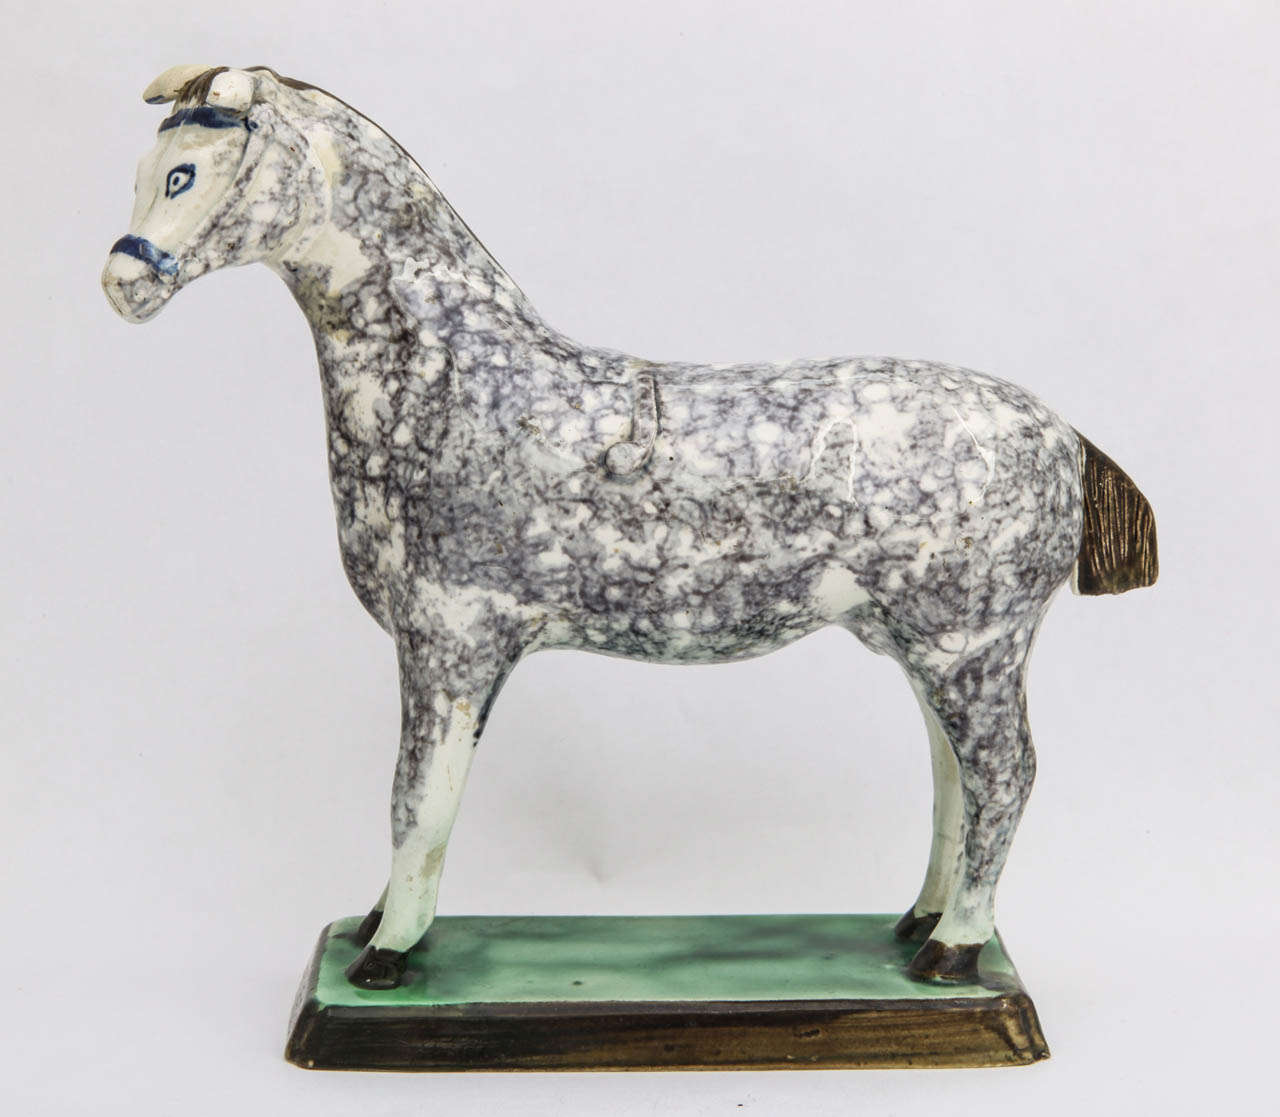 A rare English pearlware pottery (attributed to Saint Anthonys Pottery) figure of a standing horse decorated in underglaze blue, gray, green and brown colors